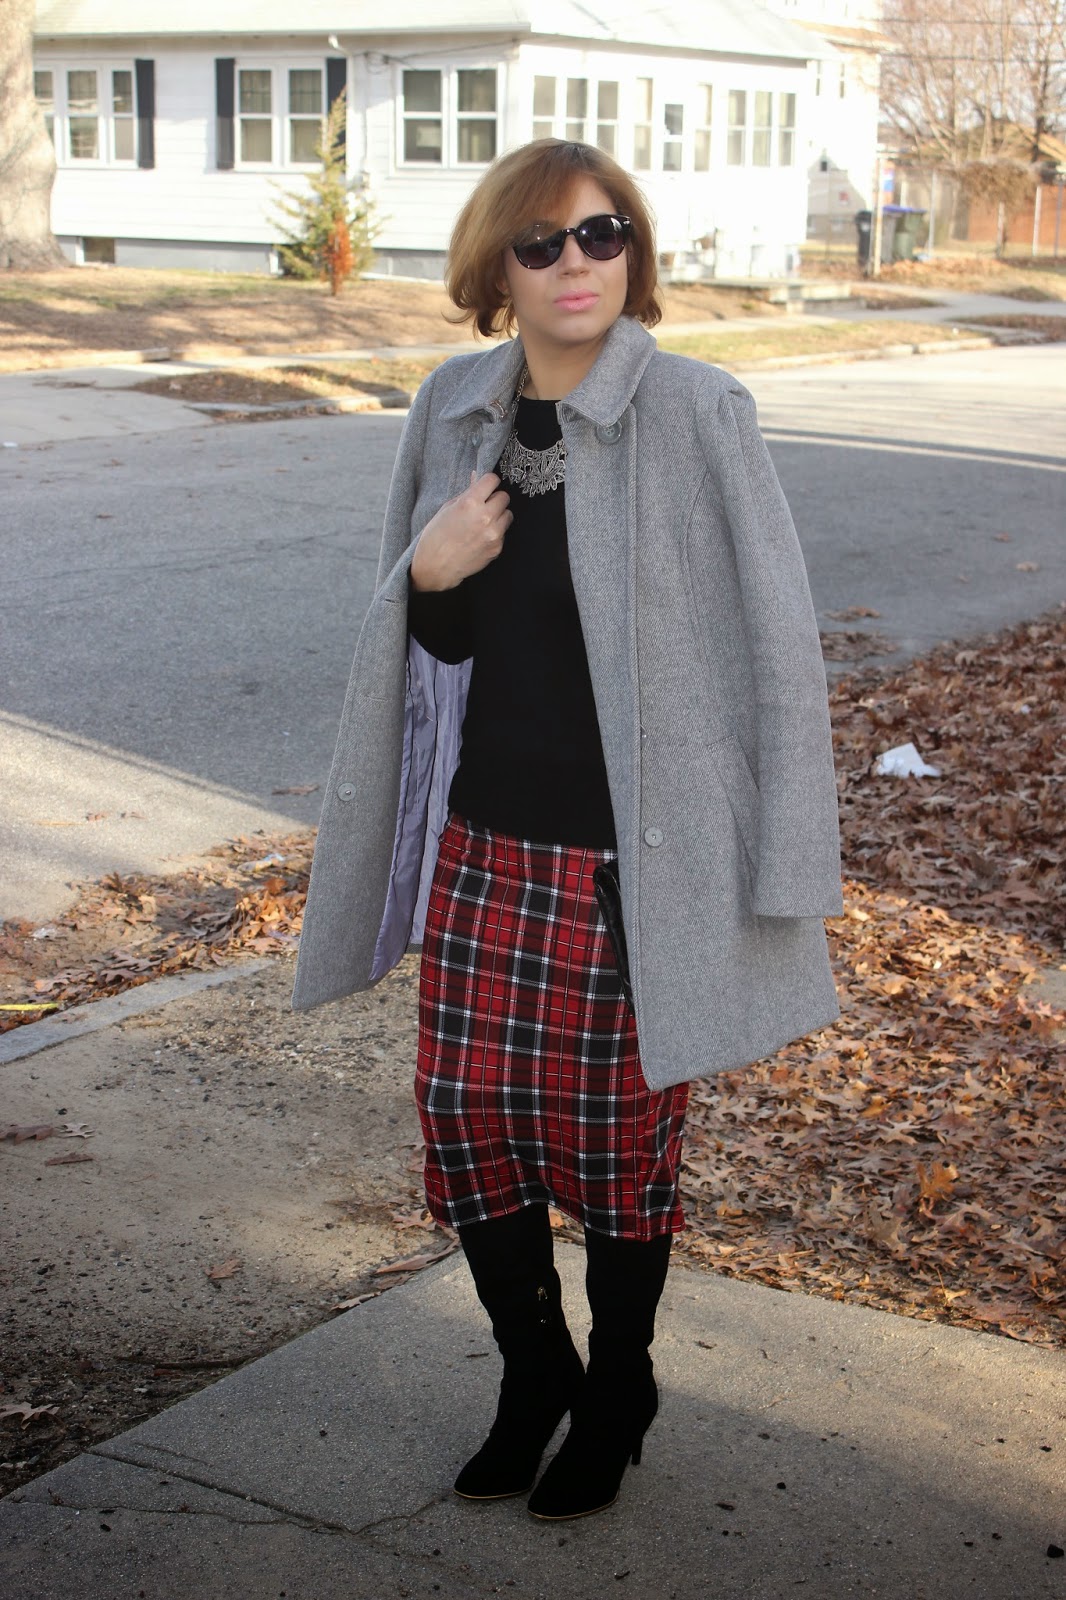 Tall Boots & Pencil Skirt | Diarychic